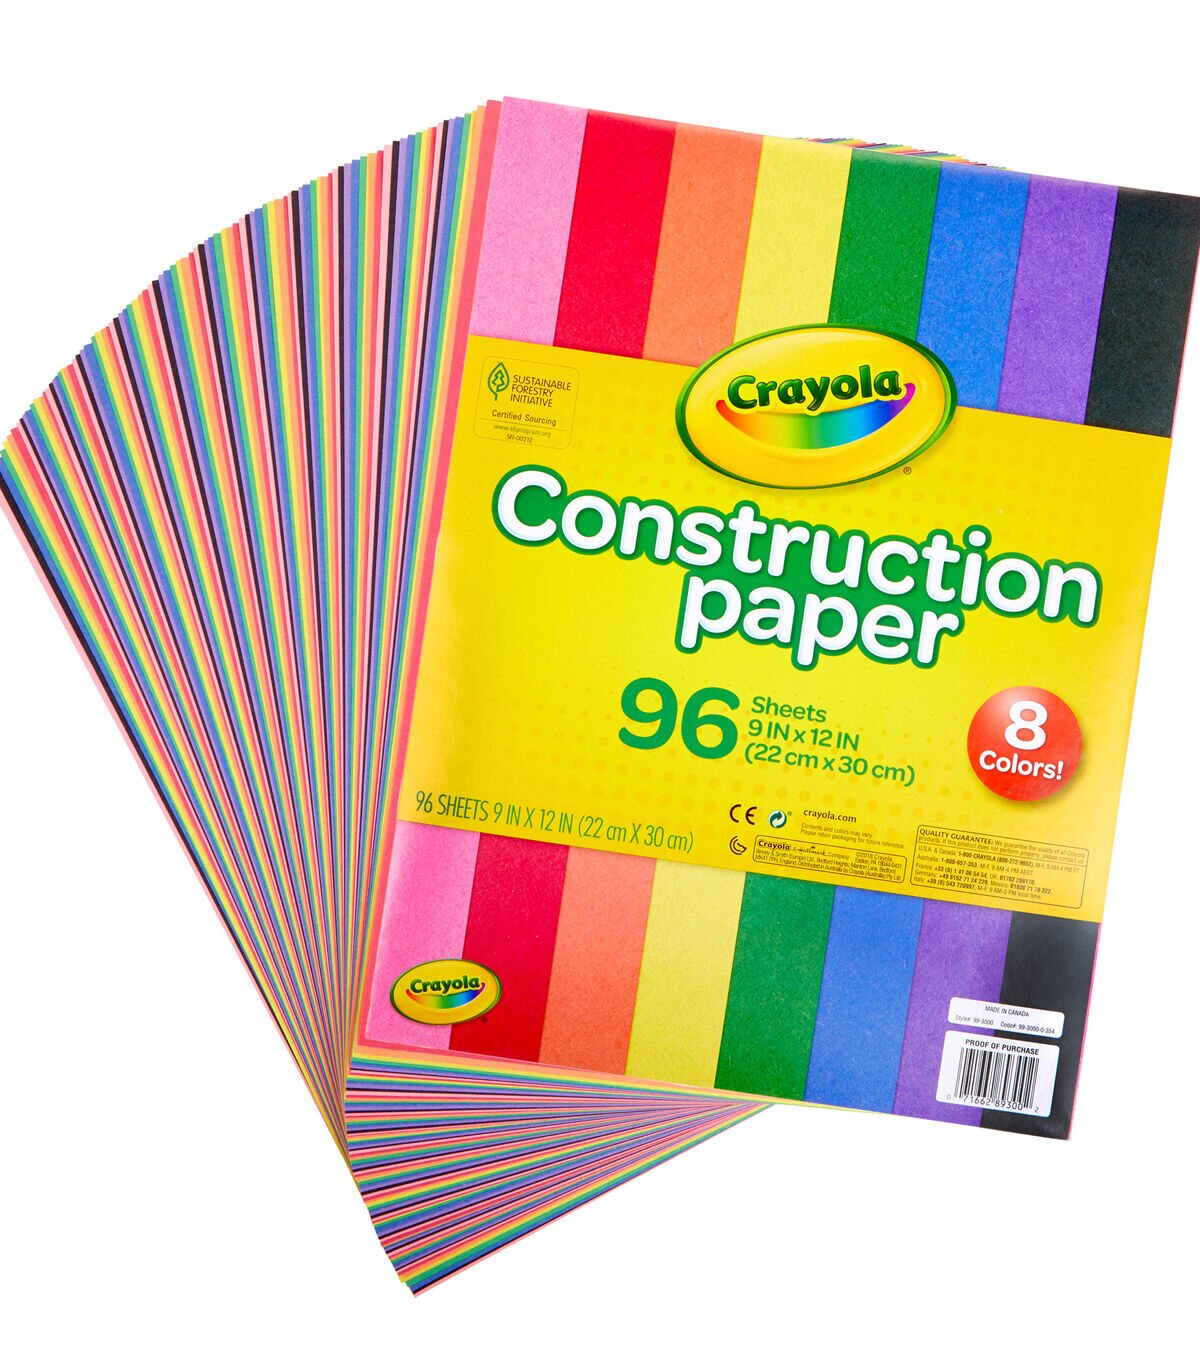 BAZIC 96 Sheets 9 X 12 Construction Paper Pad Assorted Colors Great for Creative Draw Cut Glue Fold 2-Pack Gift for Toddler Kids Classrooms School Home DIY Projects 